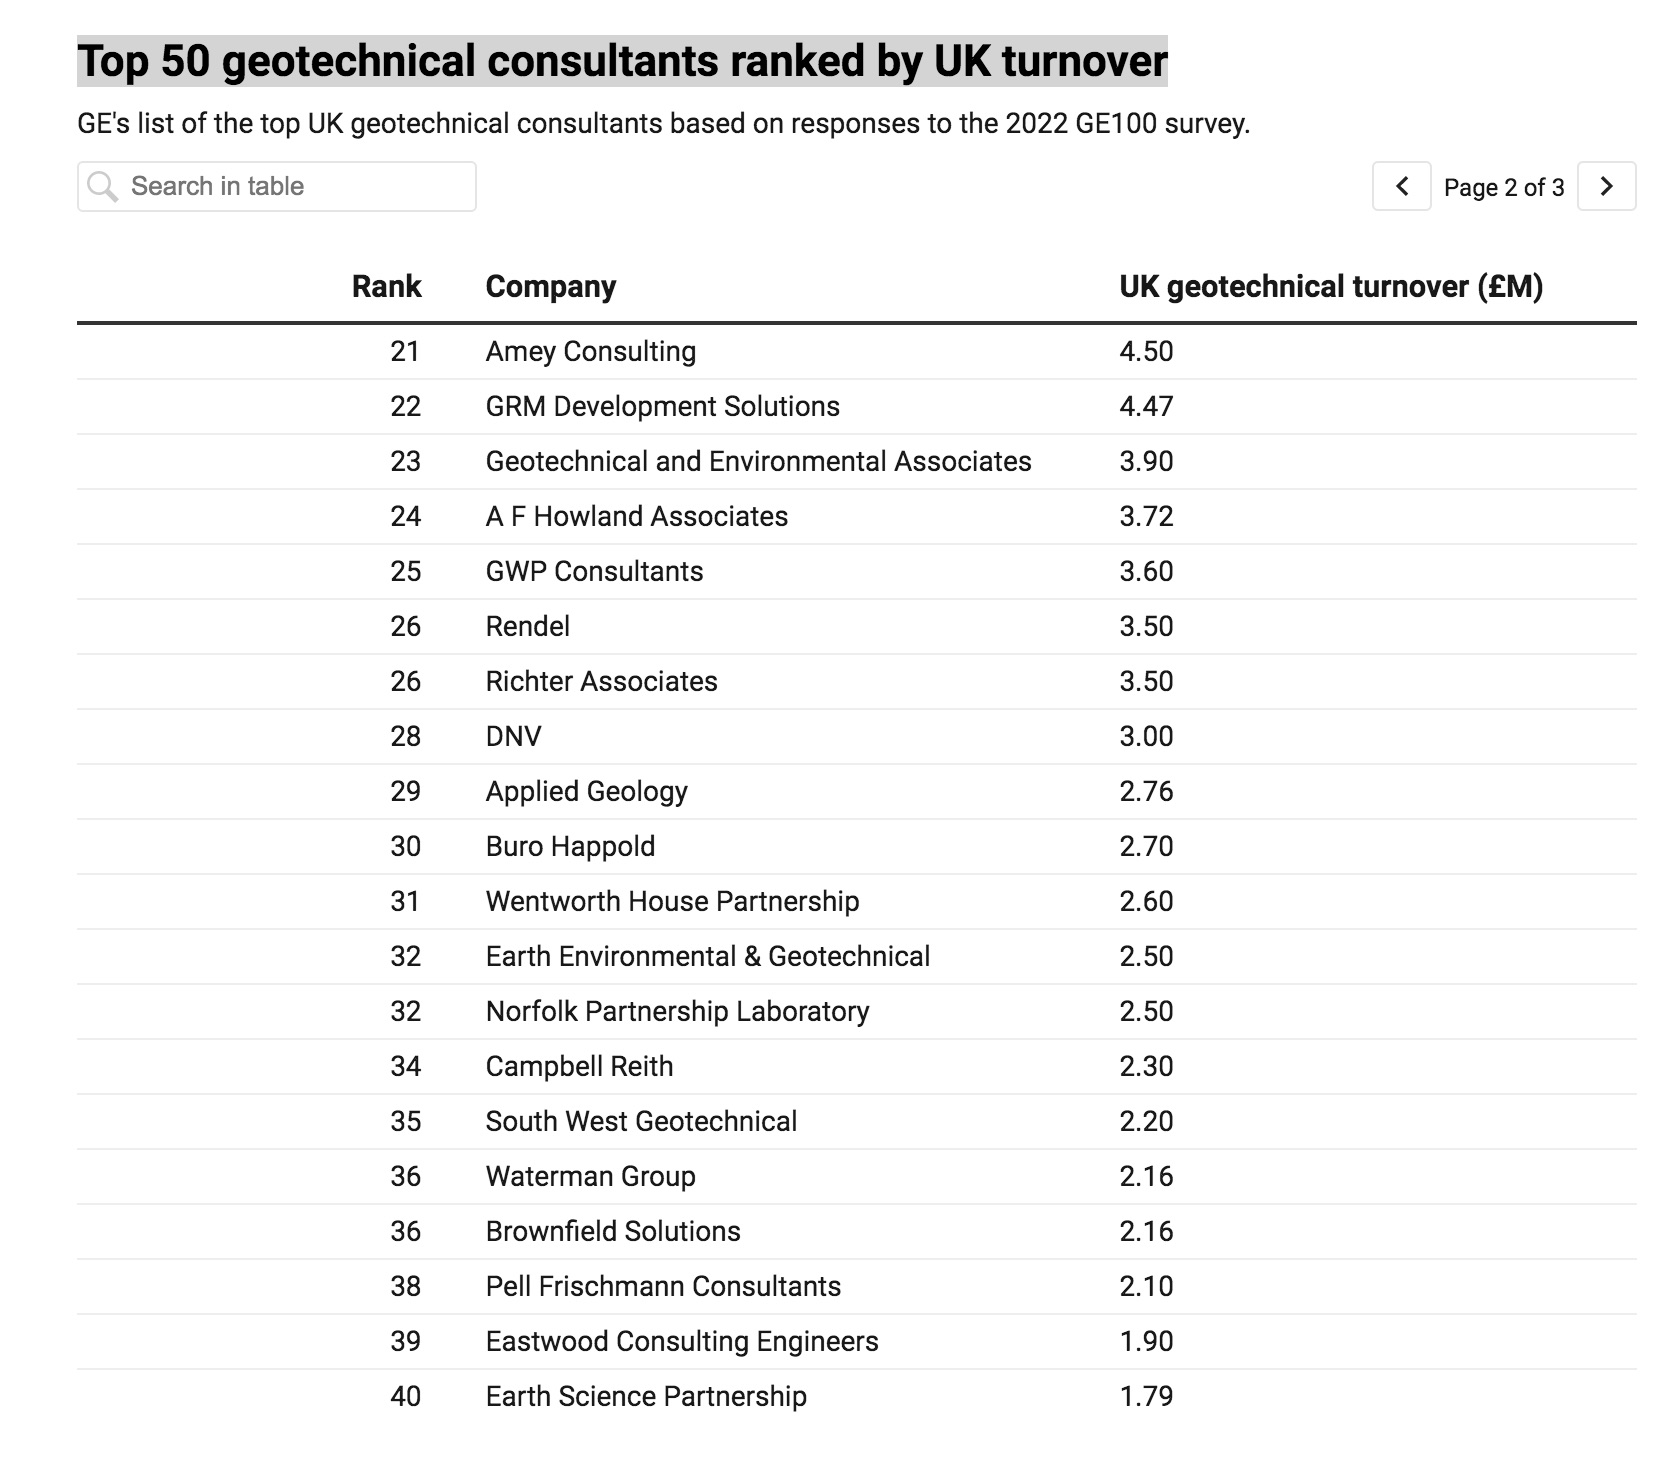 Top 50 geotechnical consultants ranked by UK turnover